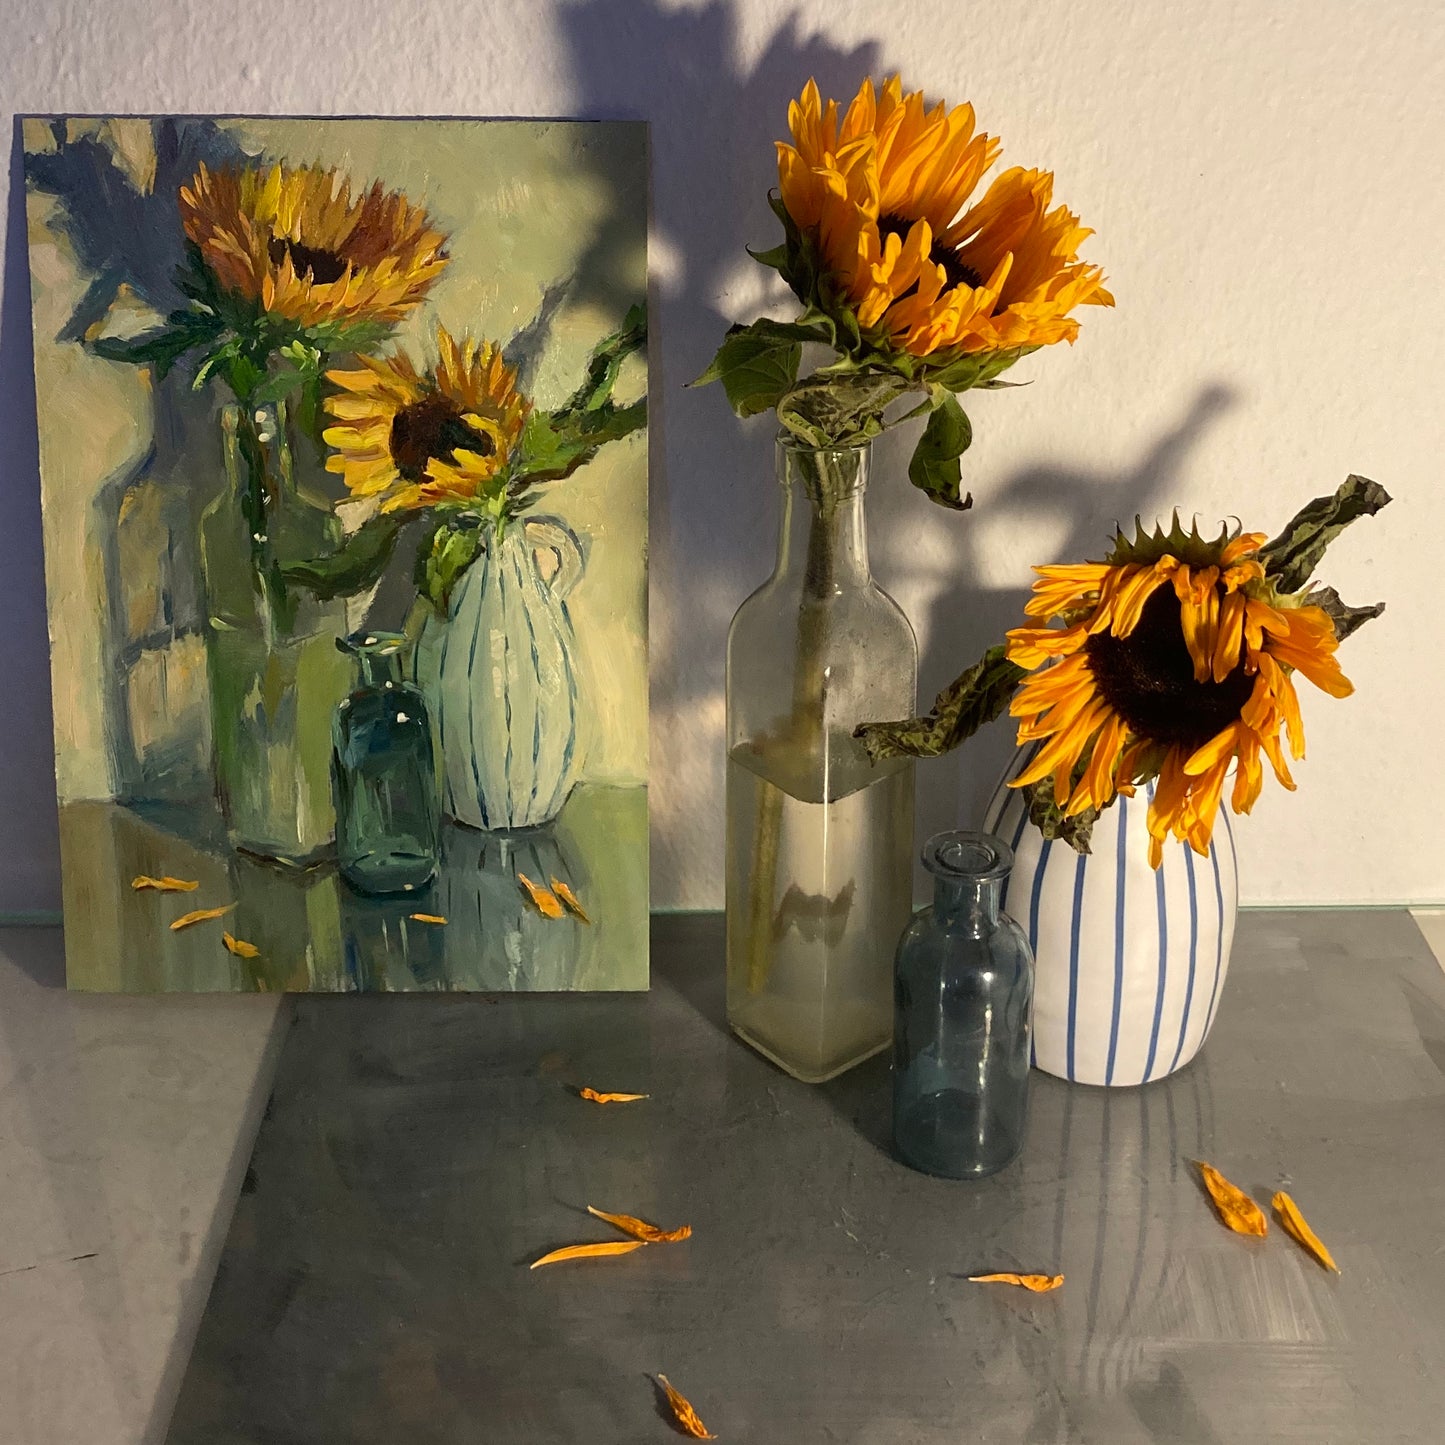 Sunflower Series 12 - Original Stilllife Painting, 8 by 12 inches